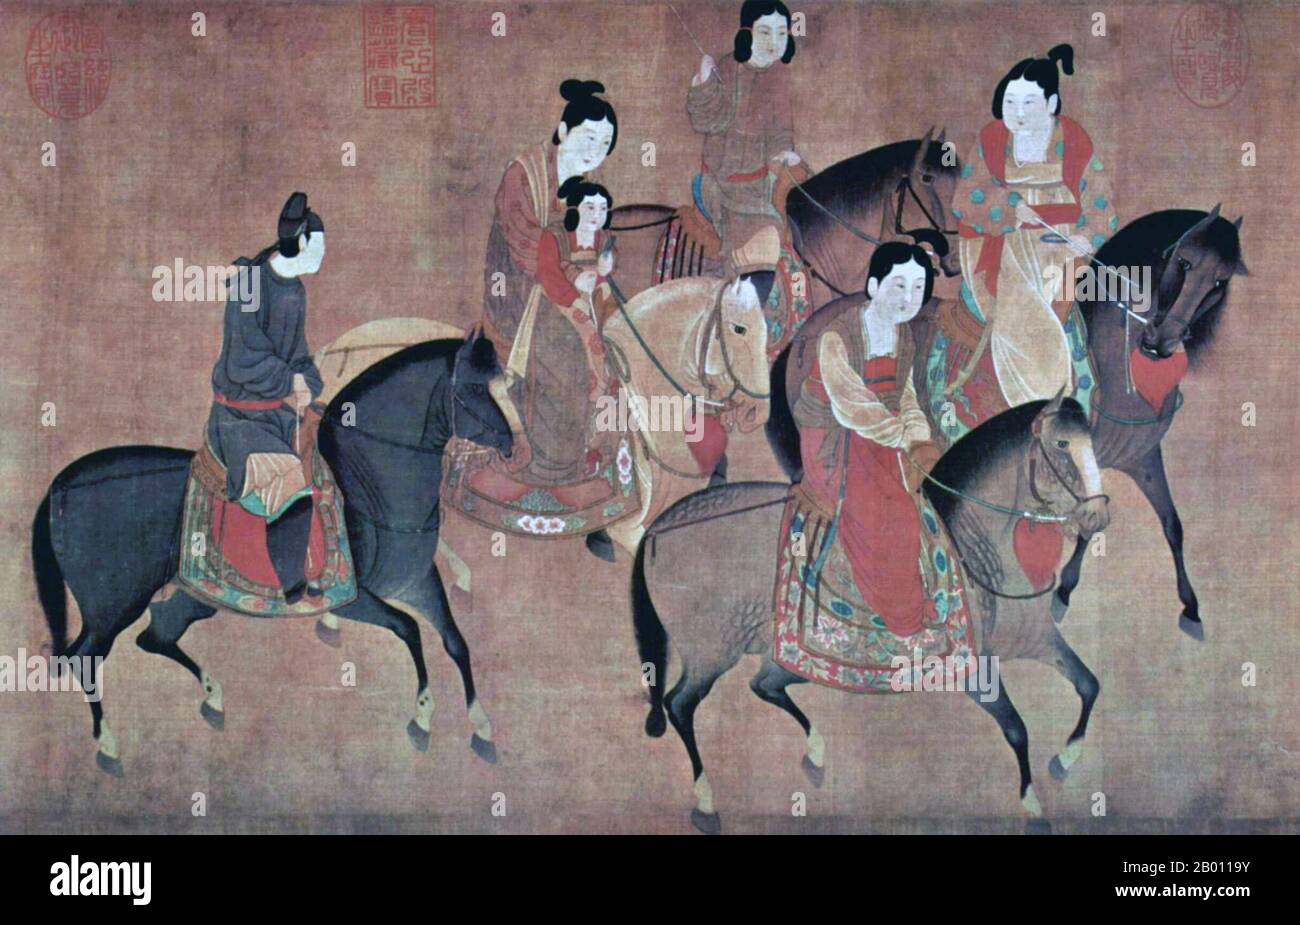 China: Lady Kuo Kuo riding with her sisters. 12th century Song Dynasty handscroll painting by Li Gonglin (1049-1106), a later version of an earlier 8th century painting by the Tang Dynasty artist Zhang Xuan (713-755). Stock Photo